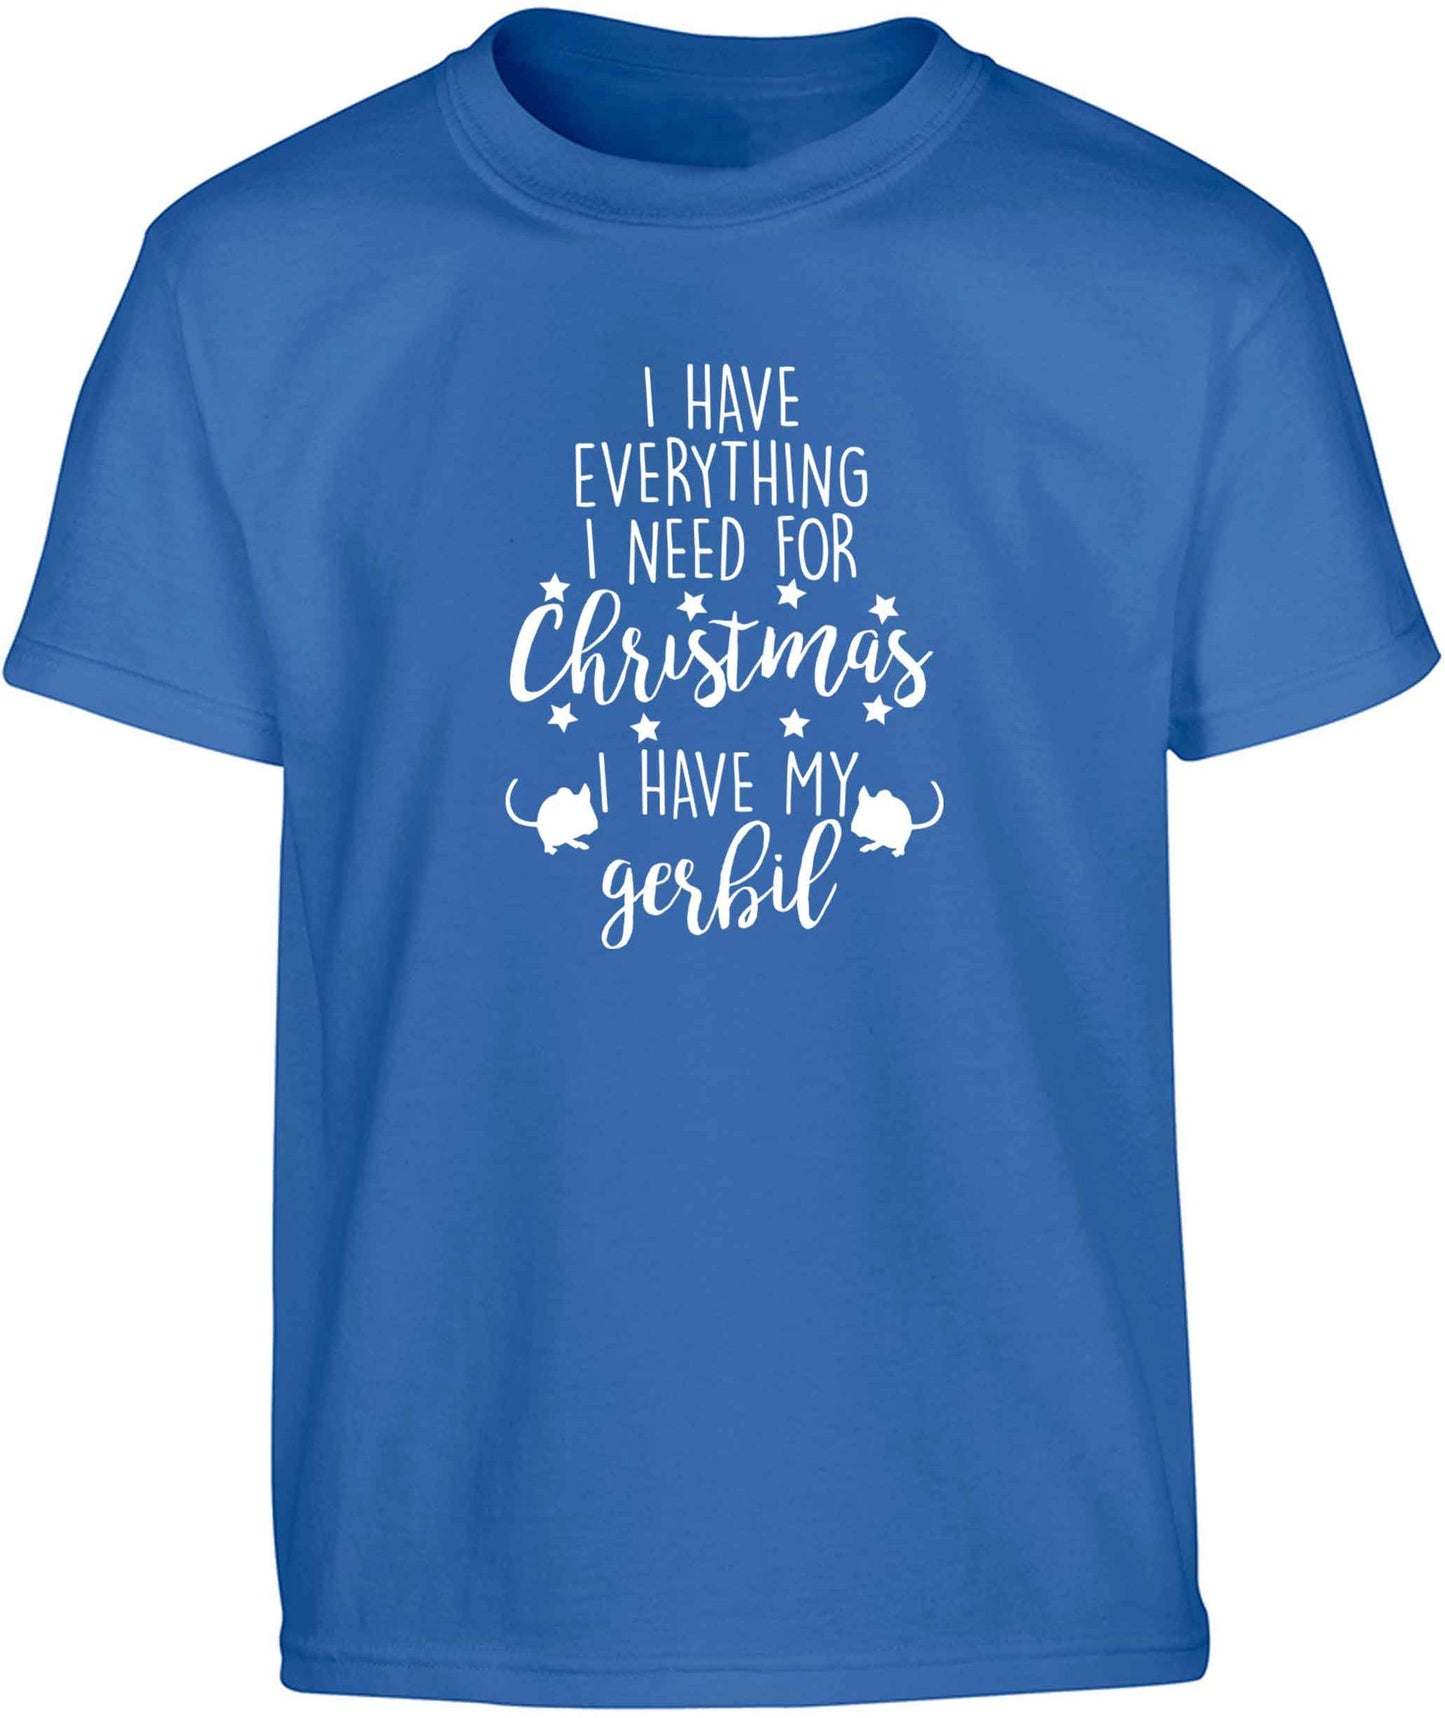 I have everything I need for Christmas I have my gerbil Children's blue Tshirt 12-13 Years